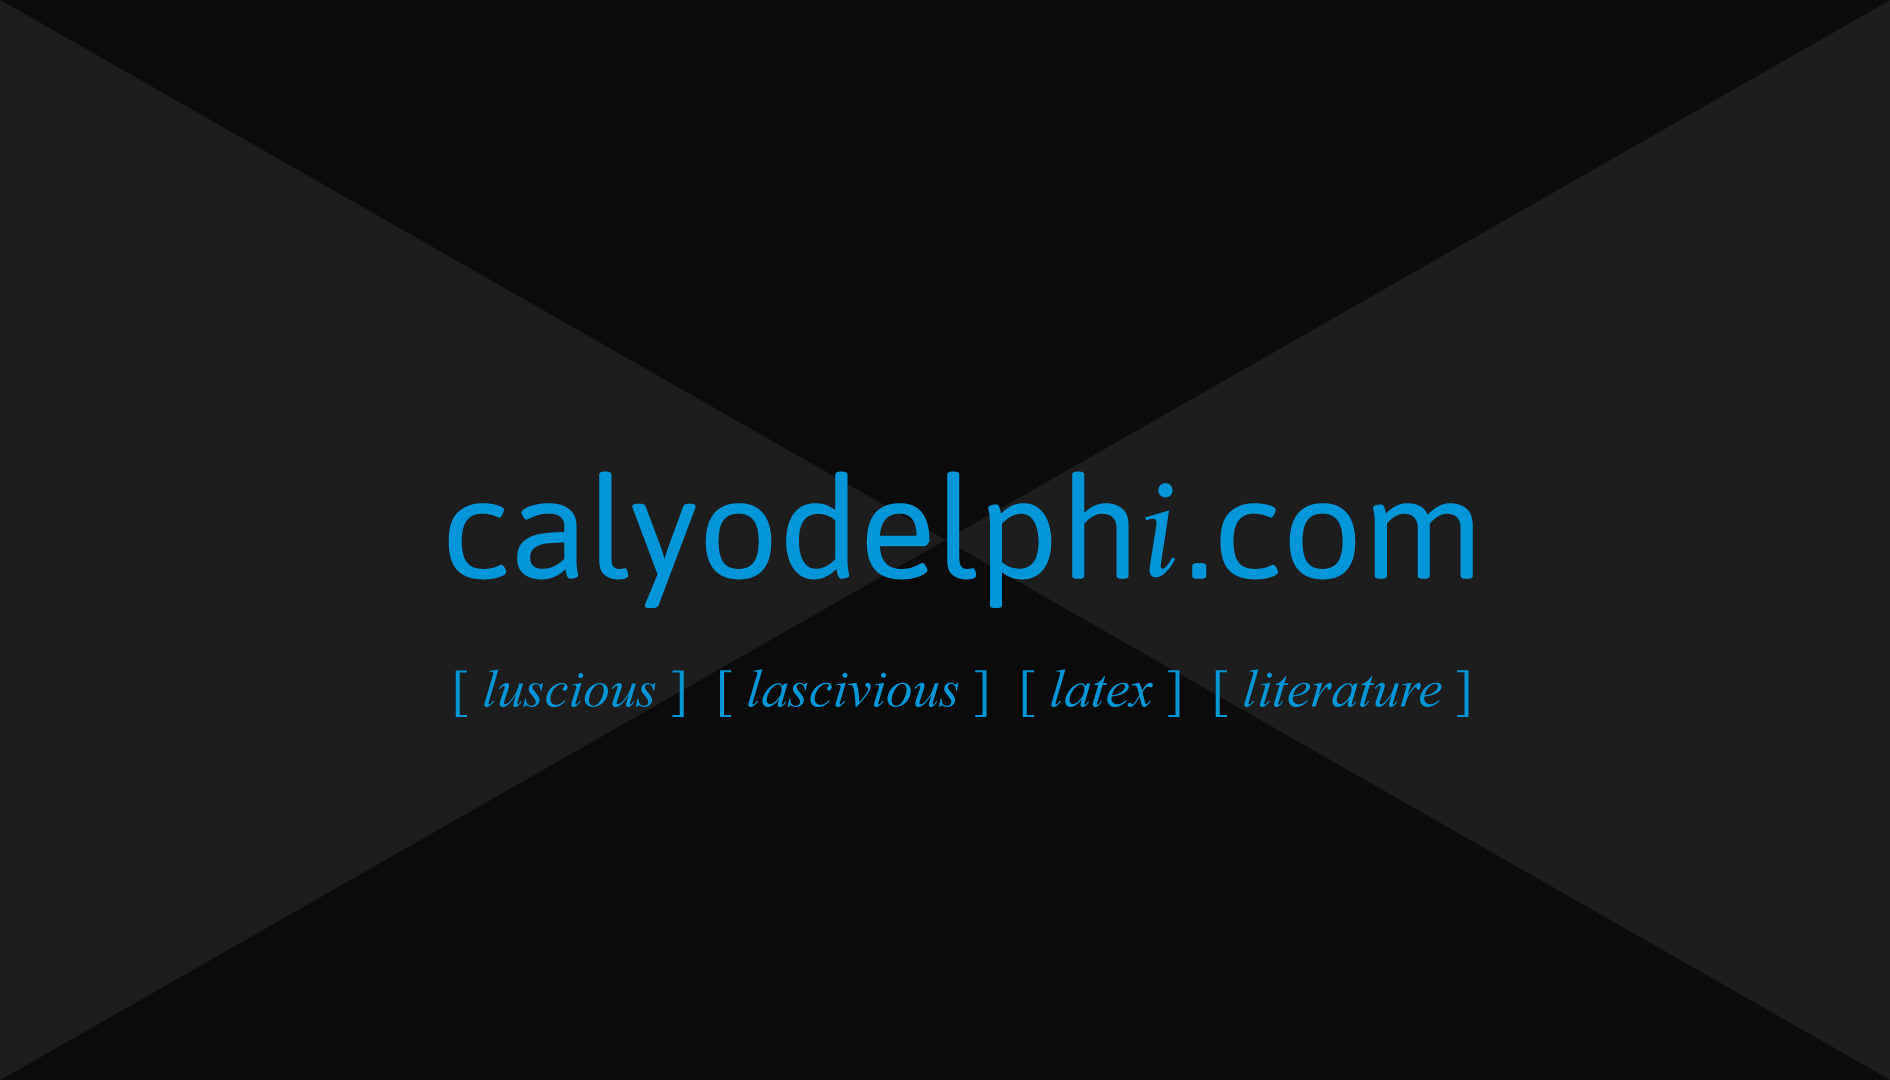 The website domain, calyodelphi.com, with a stylized i, in radioactive blue text on a black background, centered, with four keywords below, each surrounded by square brackets: luscious, lascivious, latex, literature.